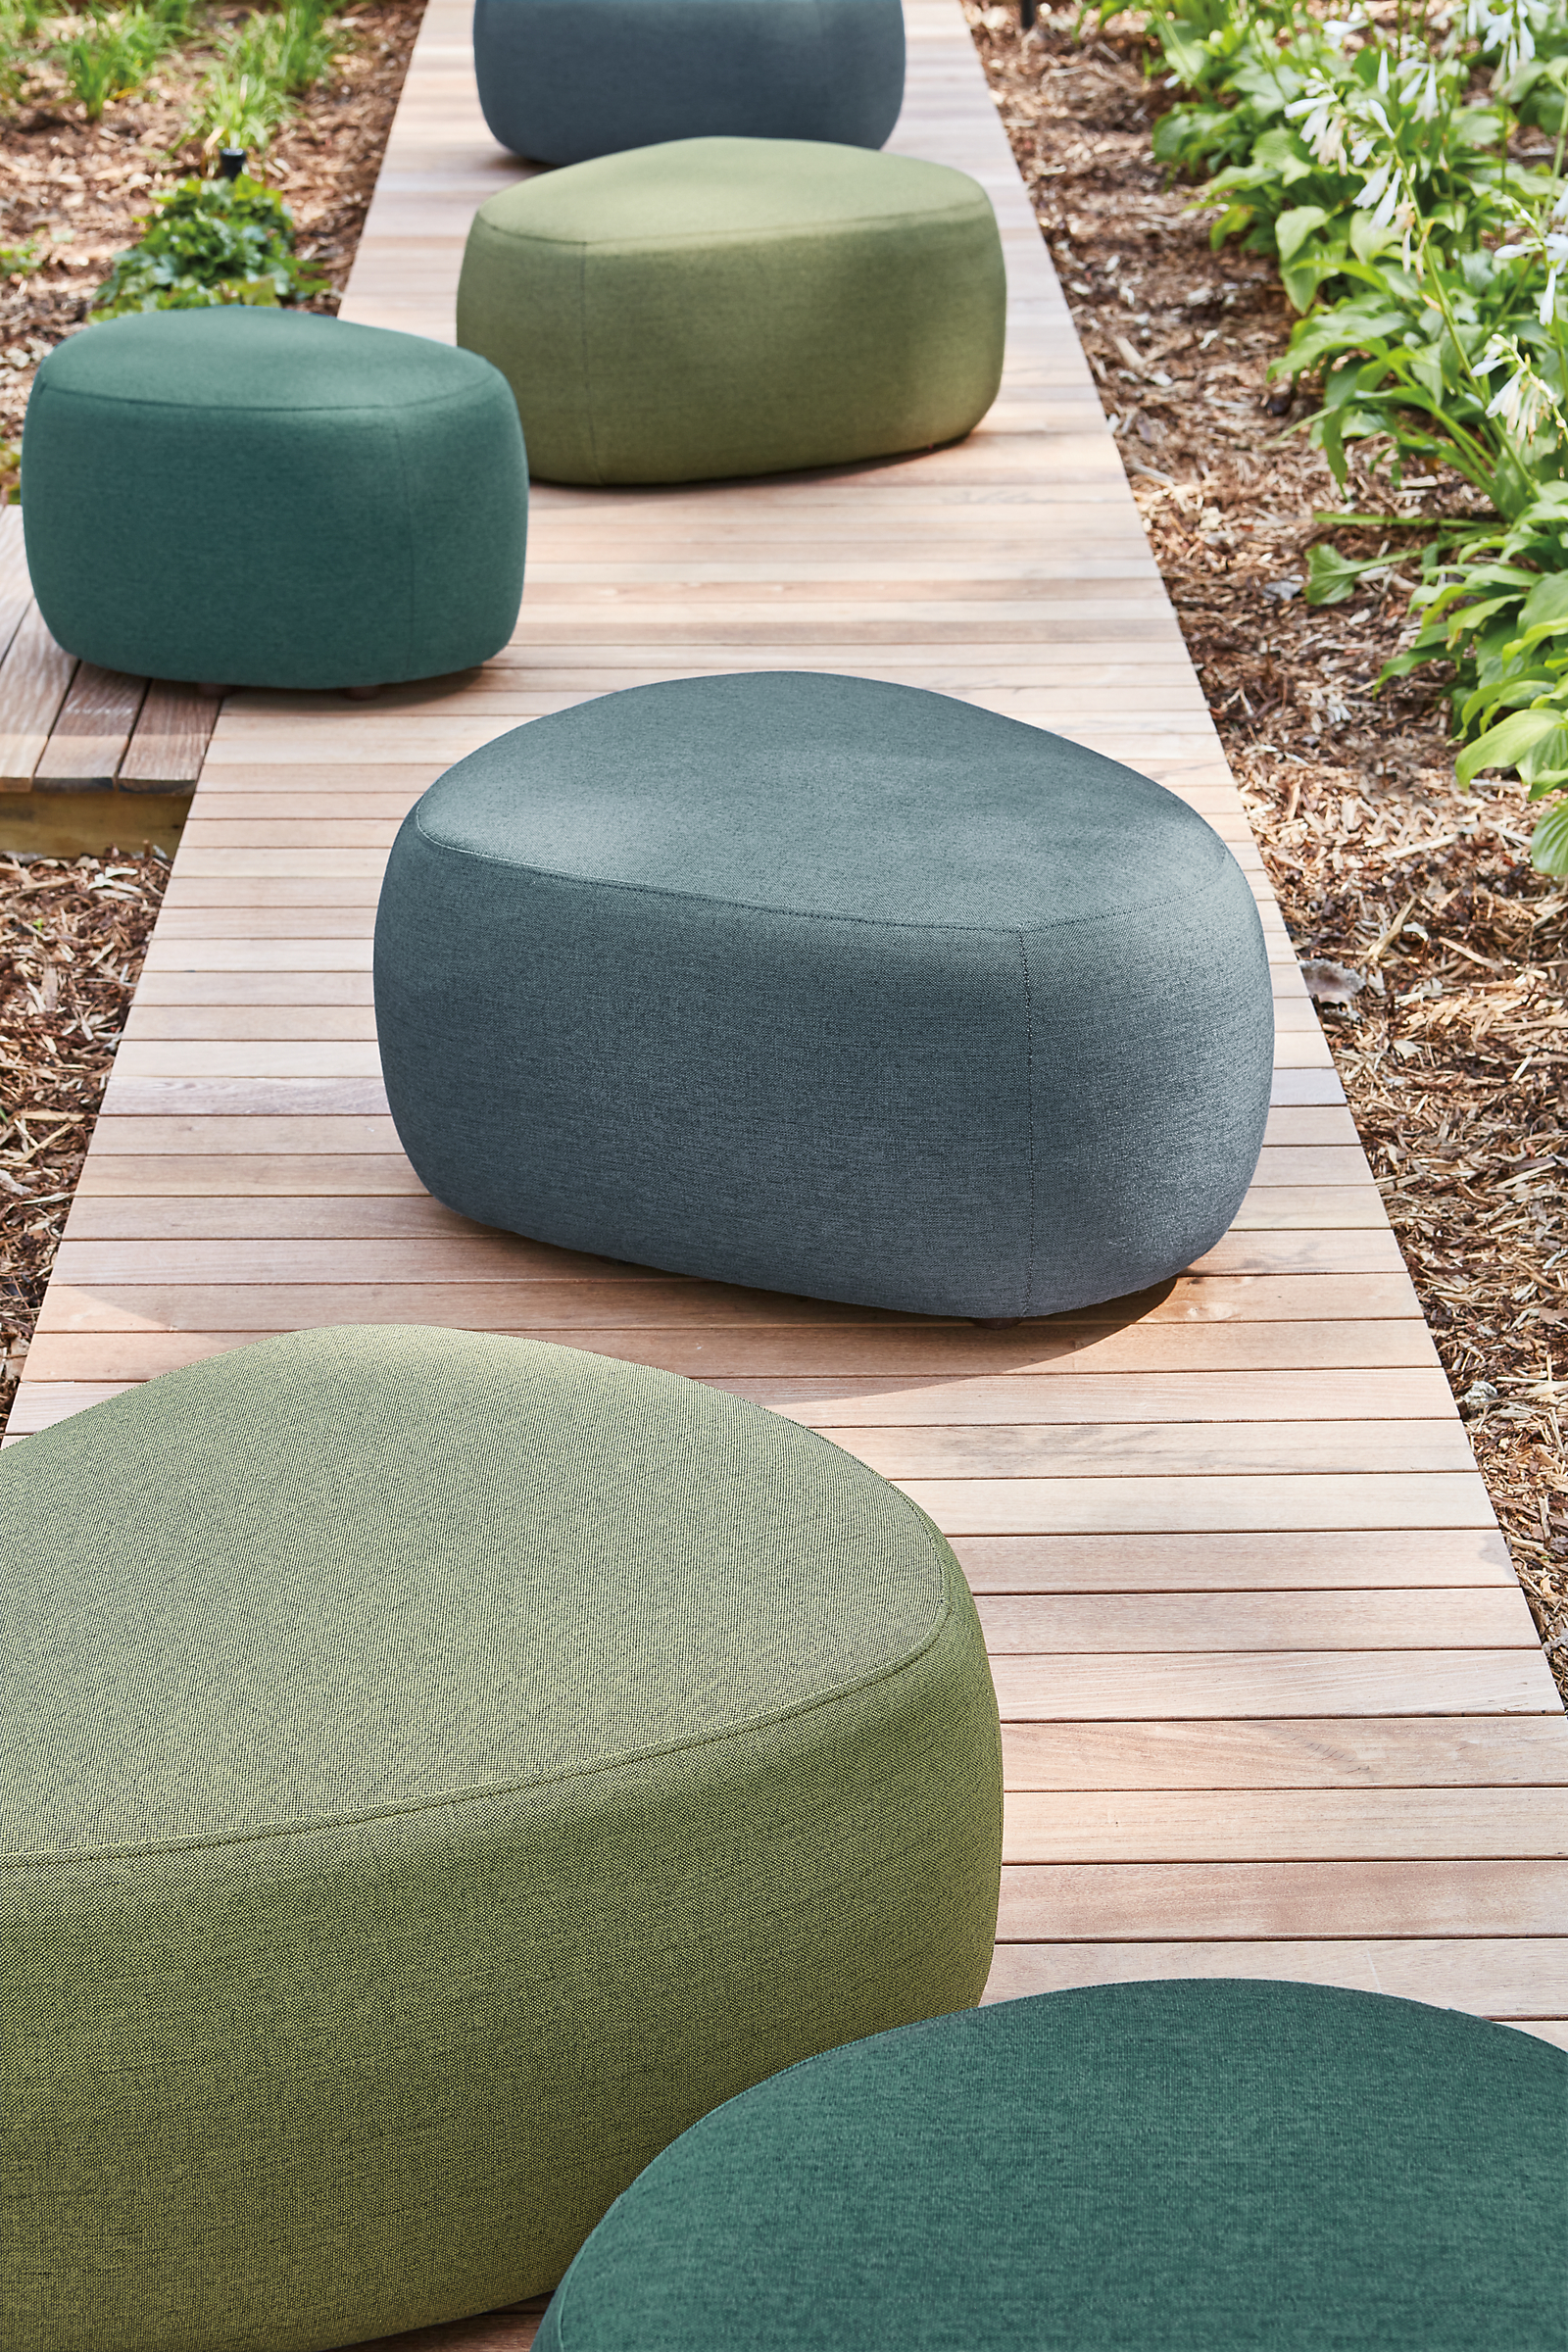 Outdoor boardwalk featuring 6 Stratford ottomans in green and blue.